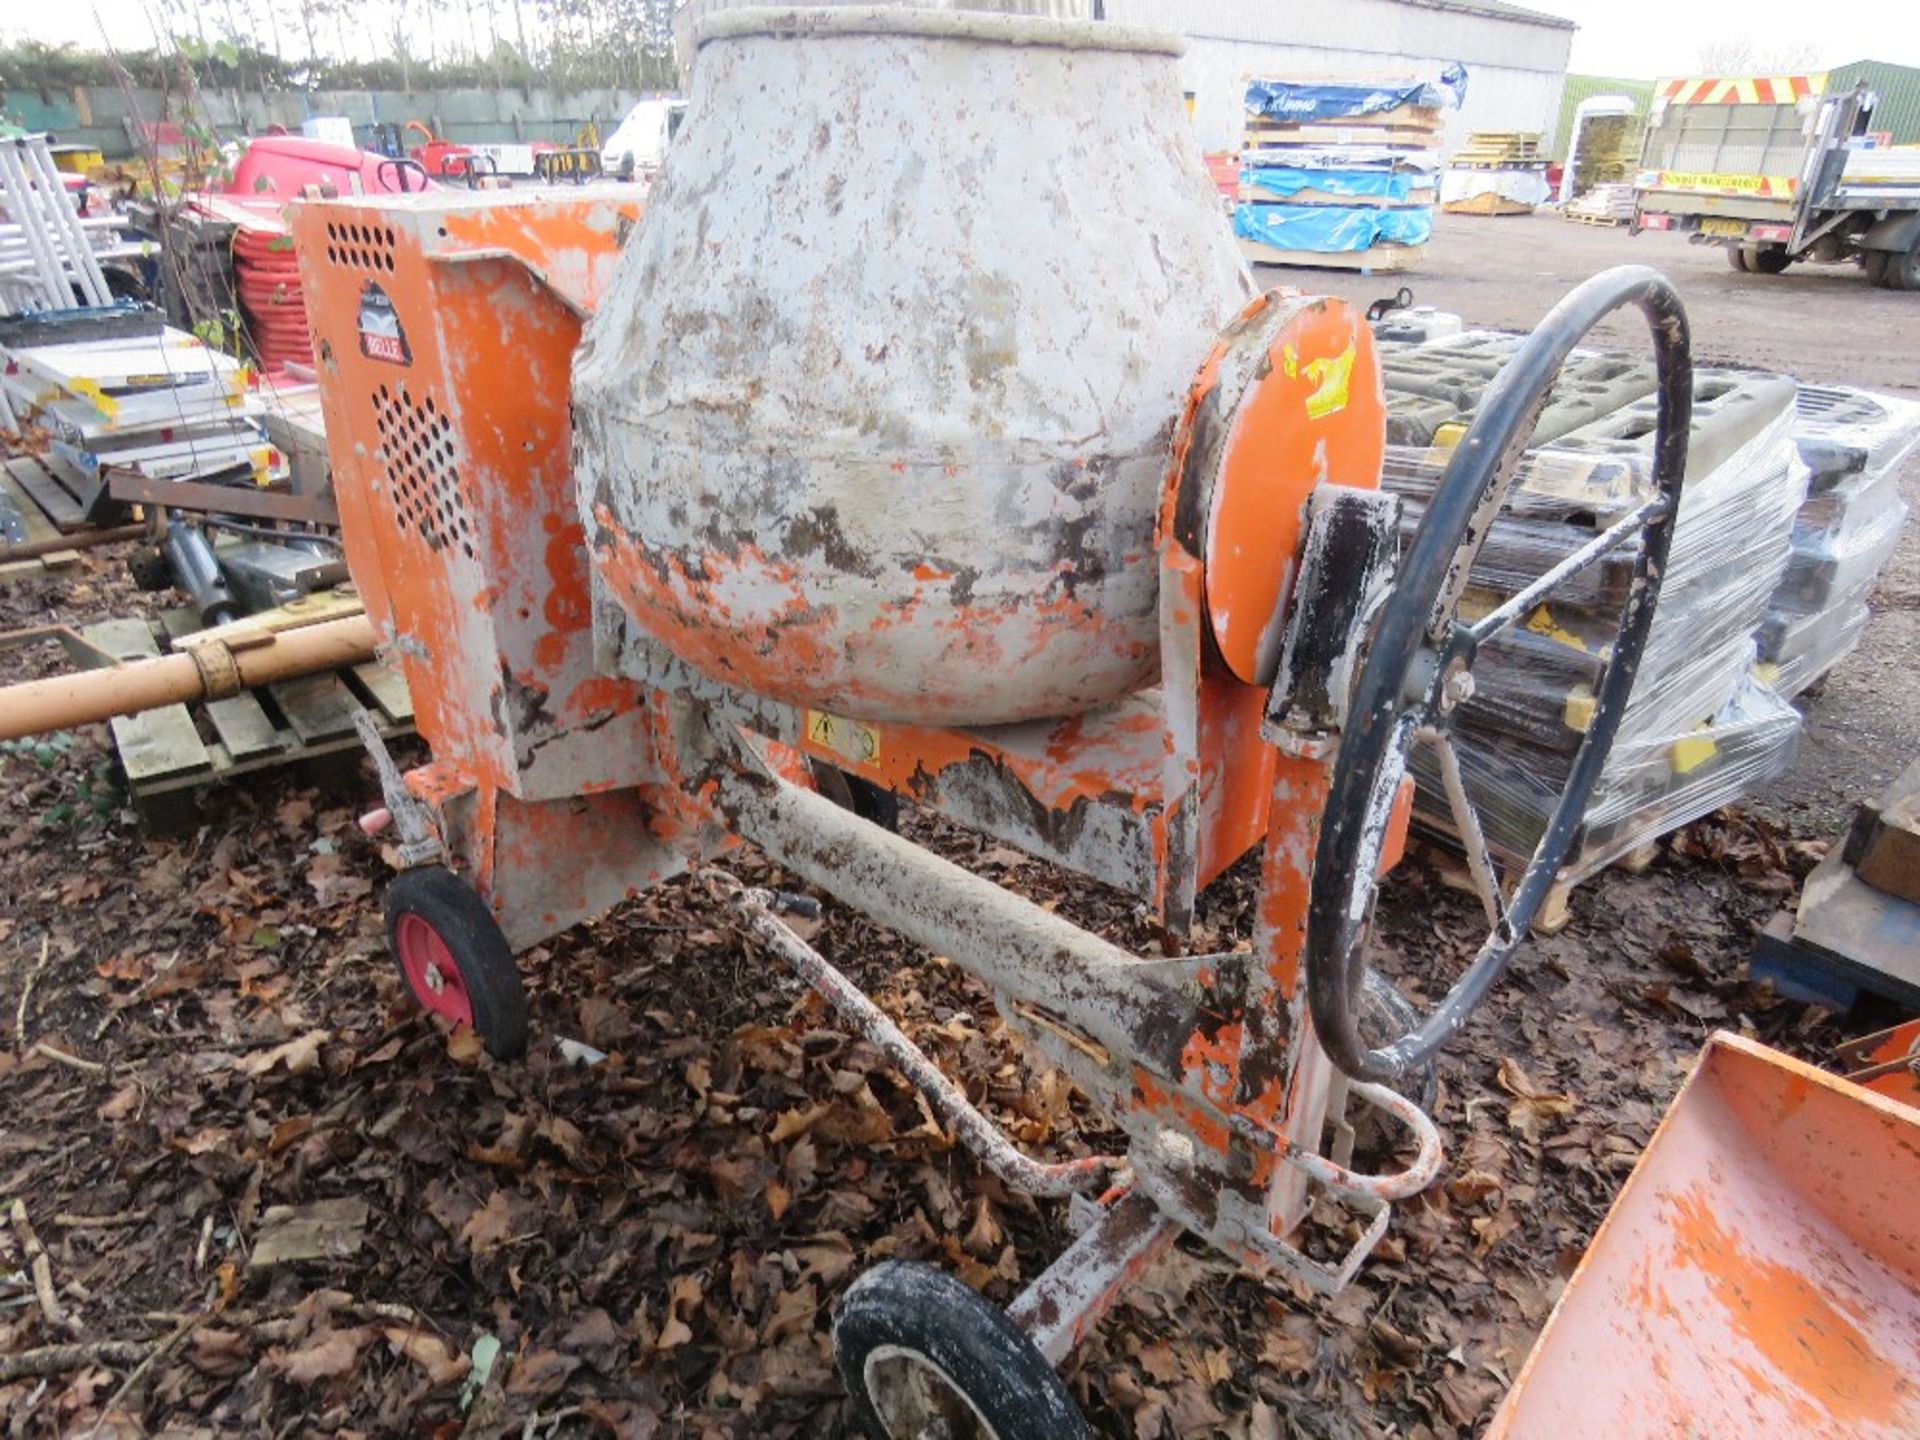 BELLE YANMAR ENGINED ELECTRIC START CEMENT MIXER - Image 2 of 3